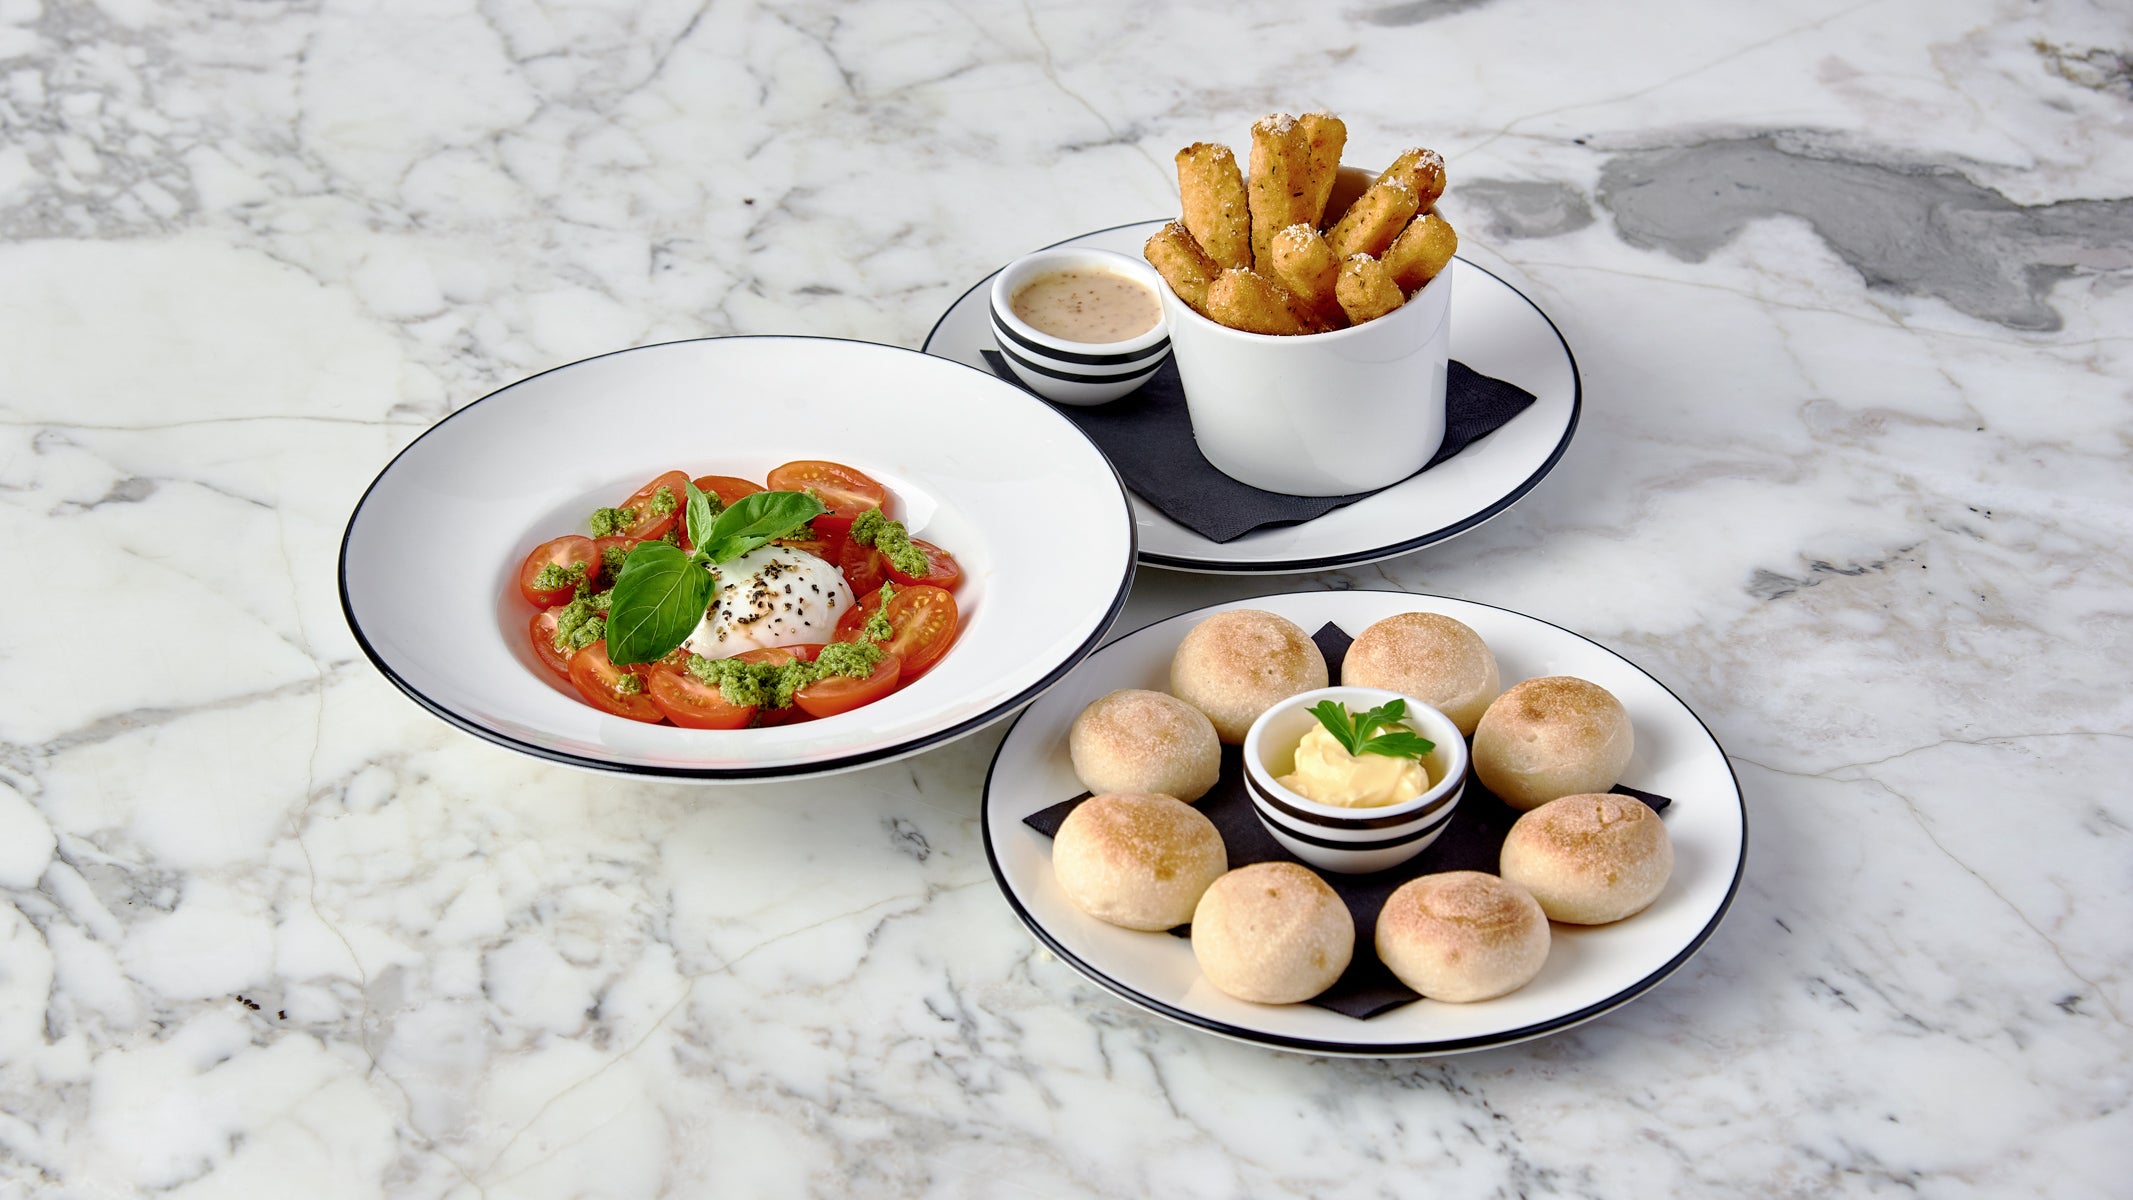 LunchBox by PizzaExpress